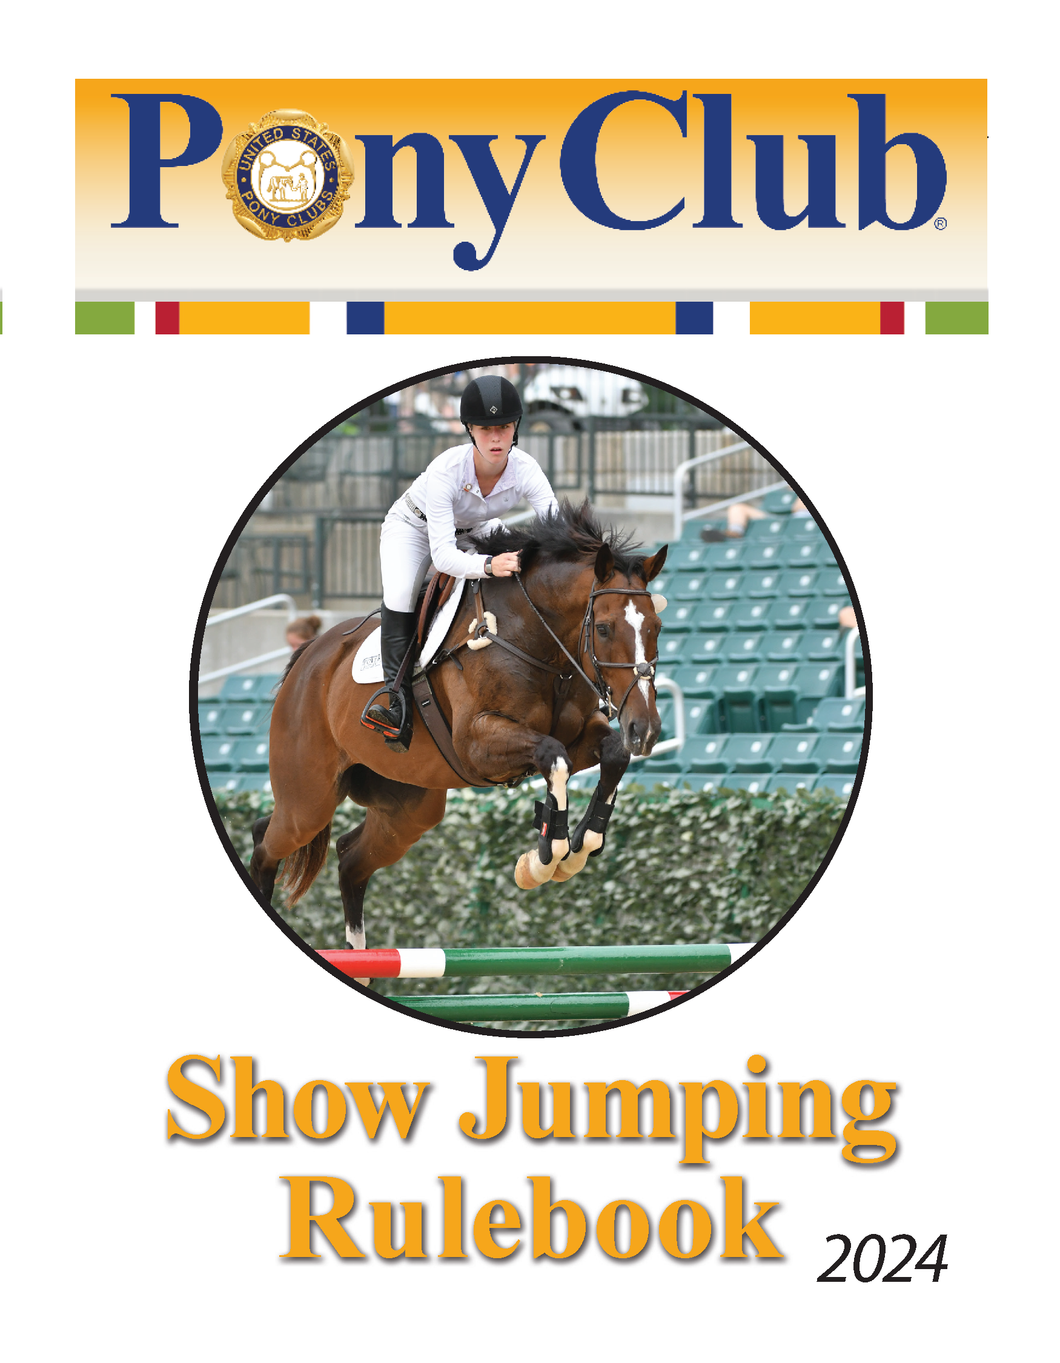 Rulebook - Show Jumping